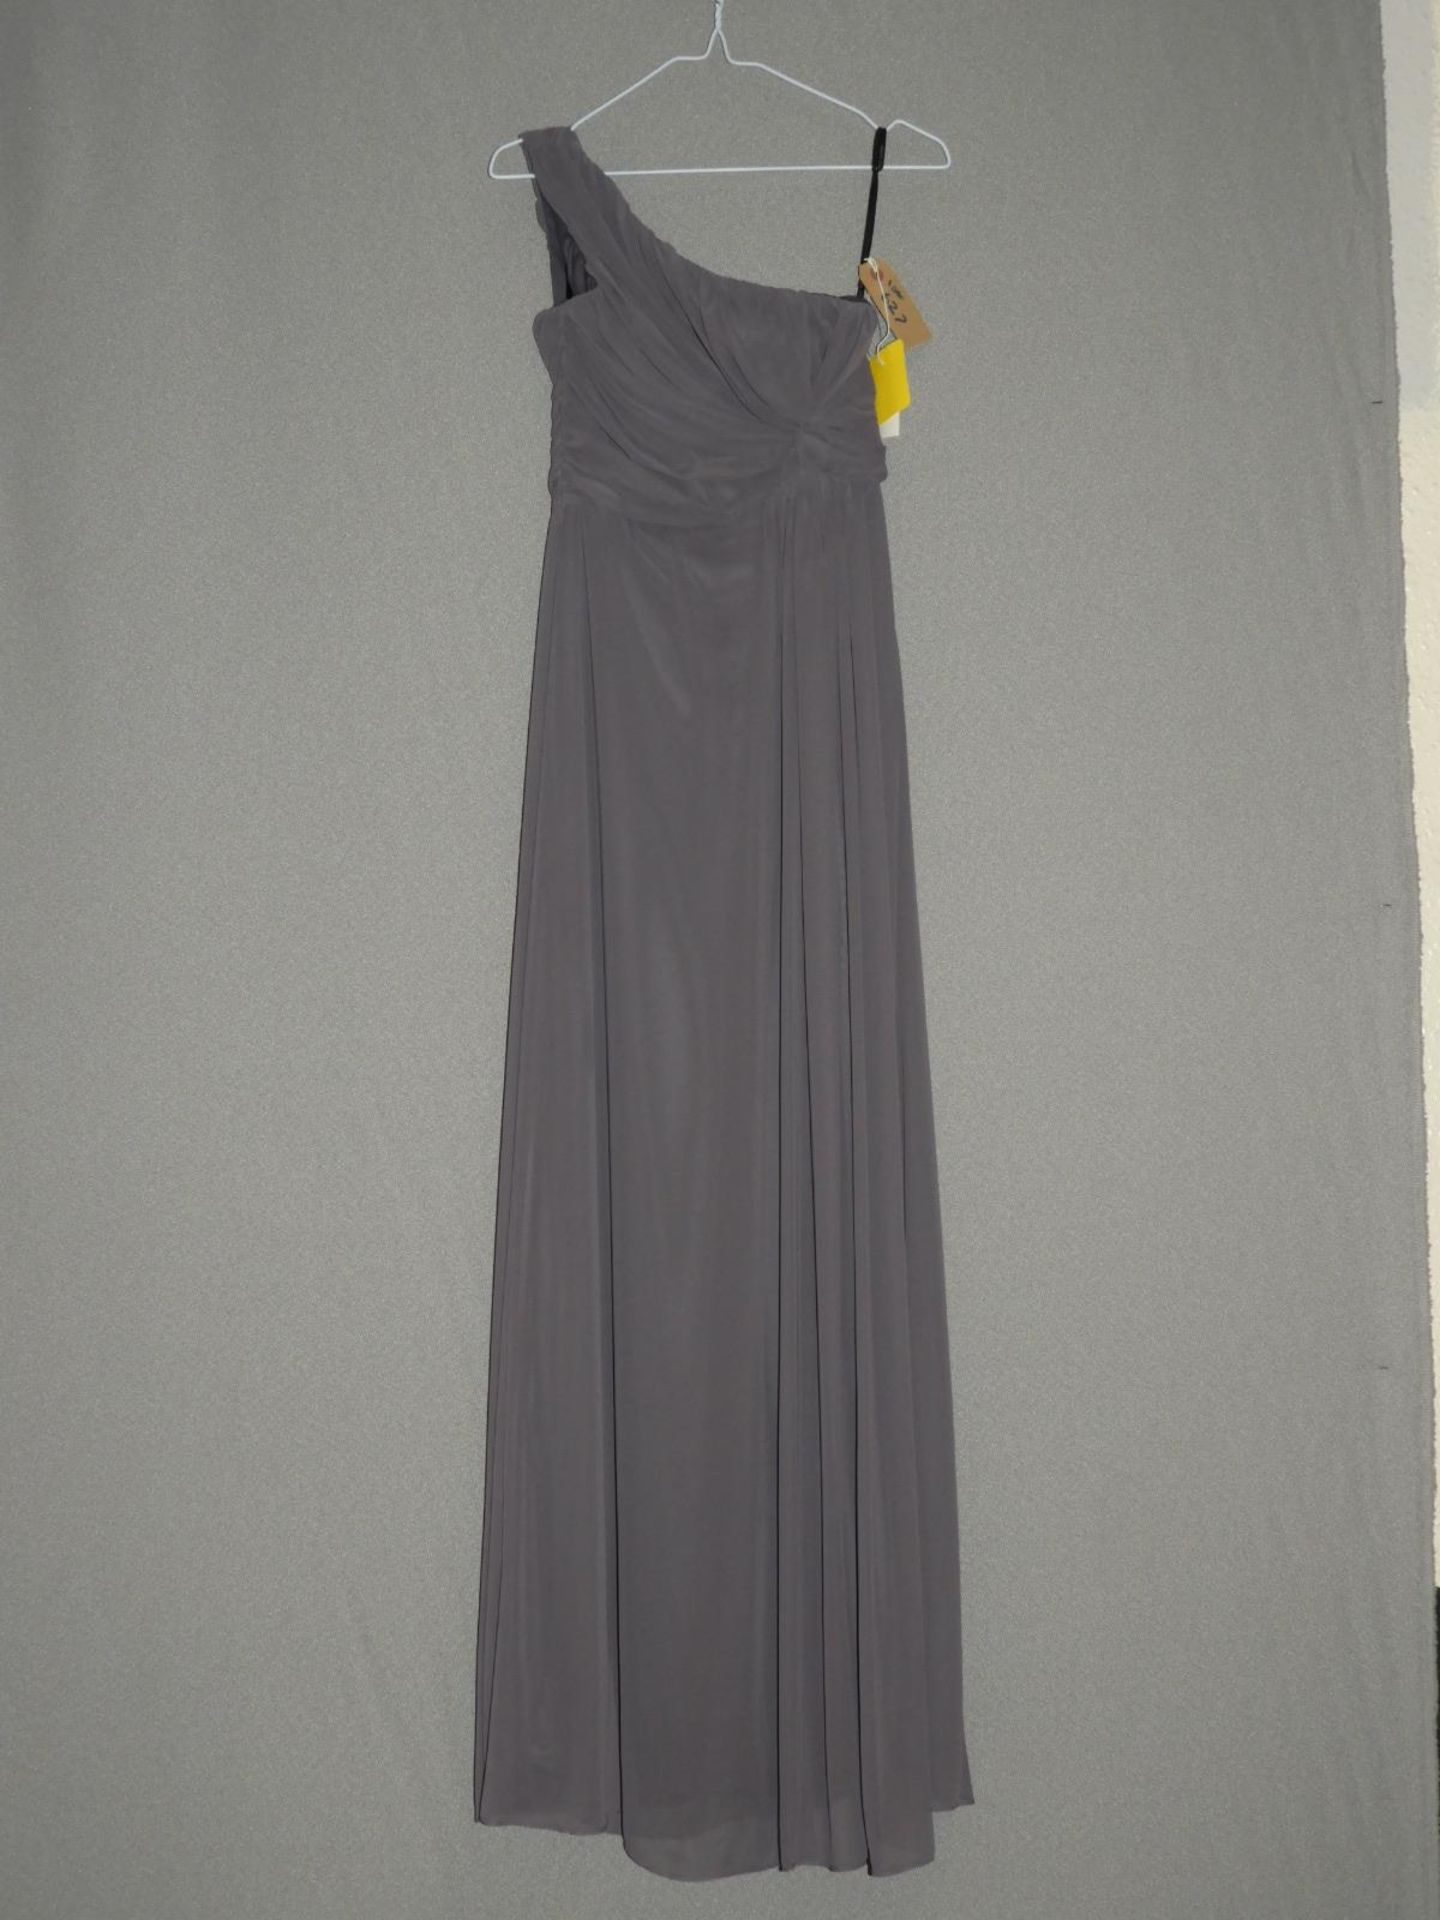 *Size: 2 Stormy Bridesmaid Dress by Dessy Collecti